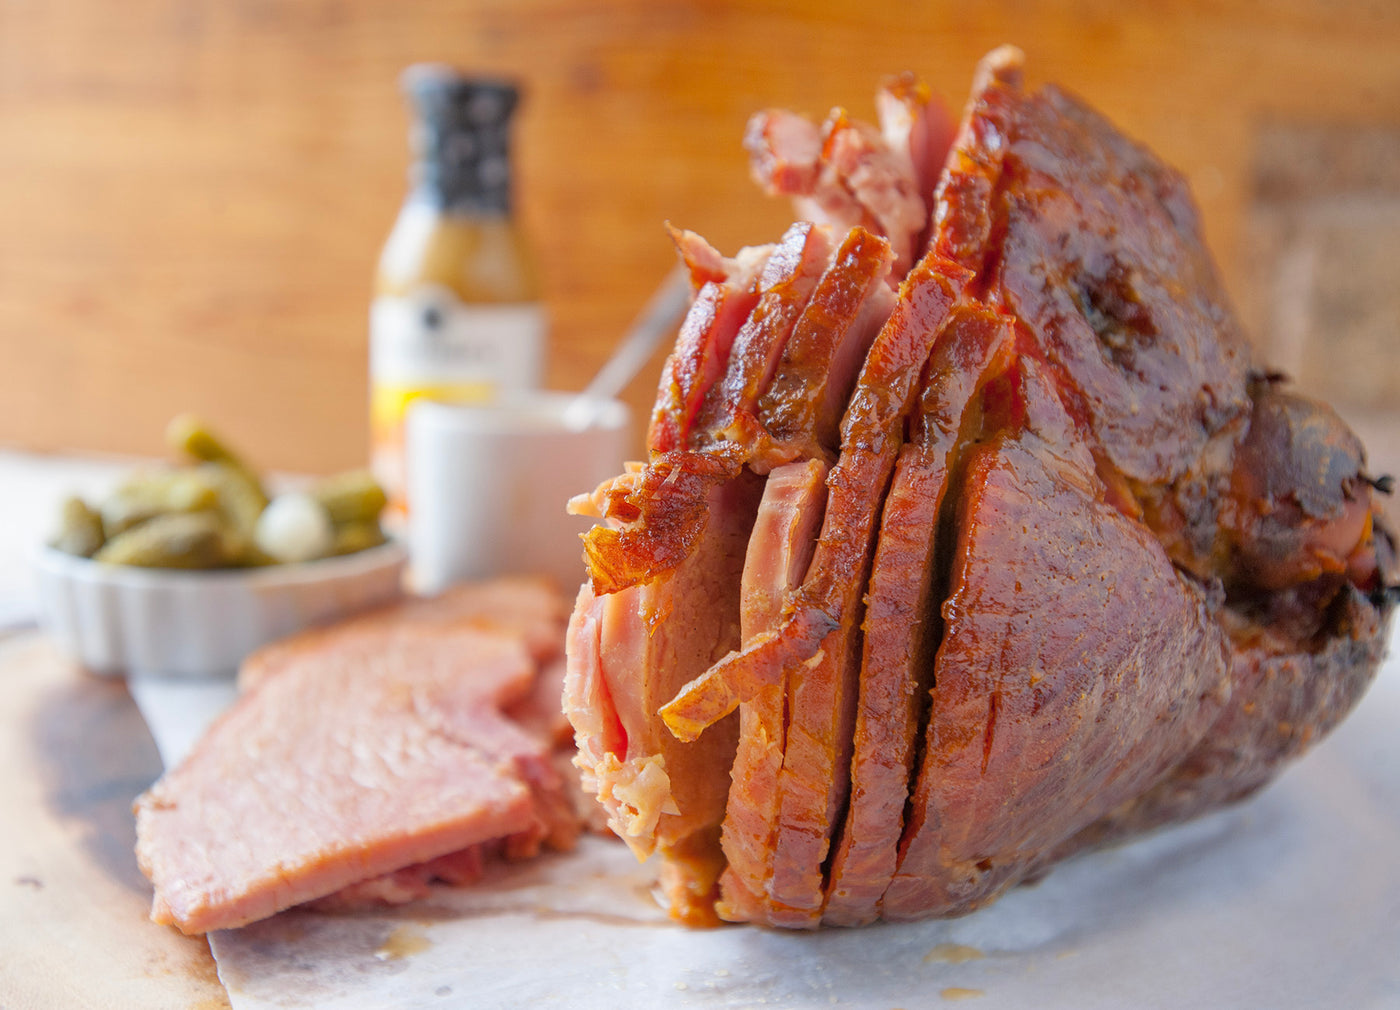 Is Uncured Ham Cooked? Facts and Safety Tips